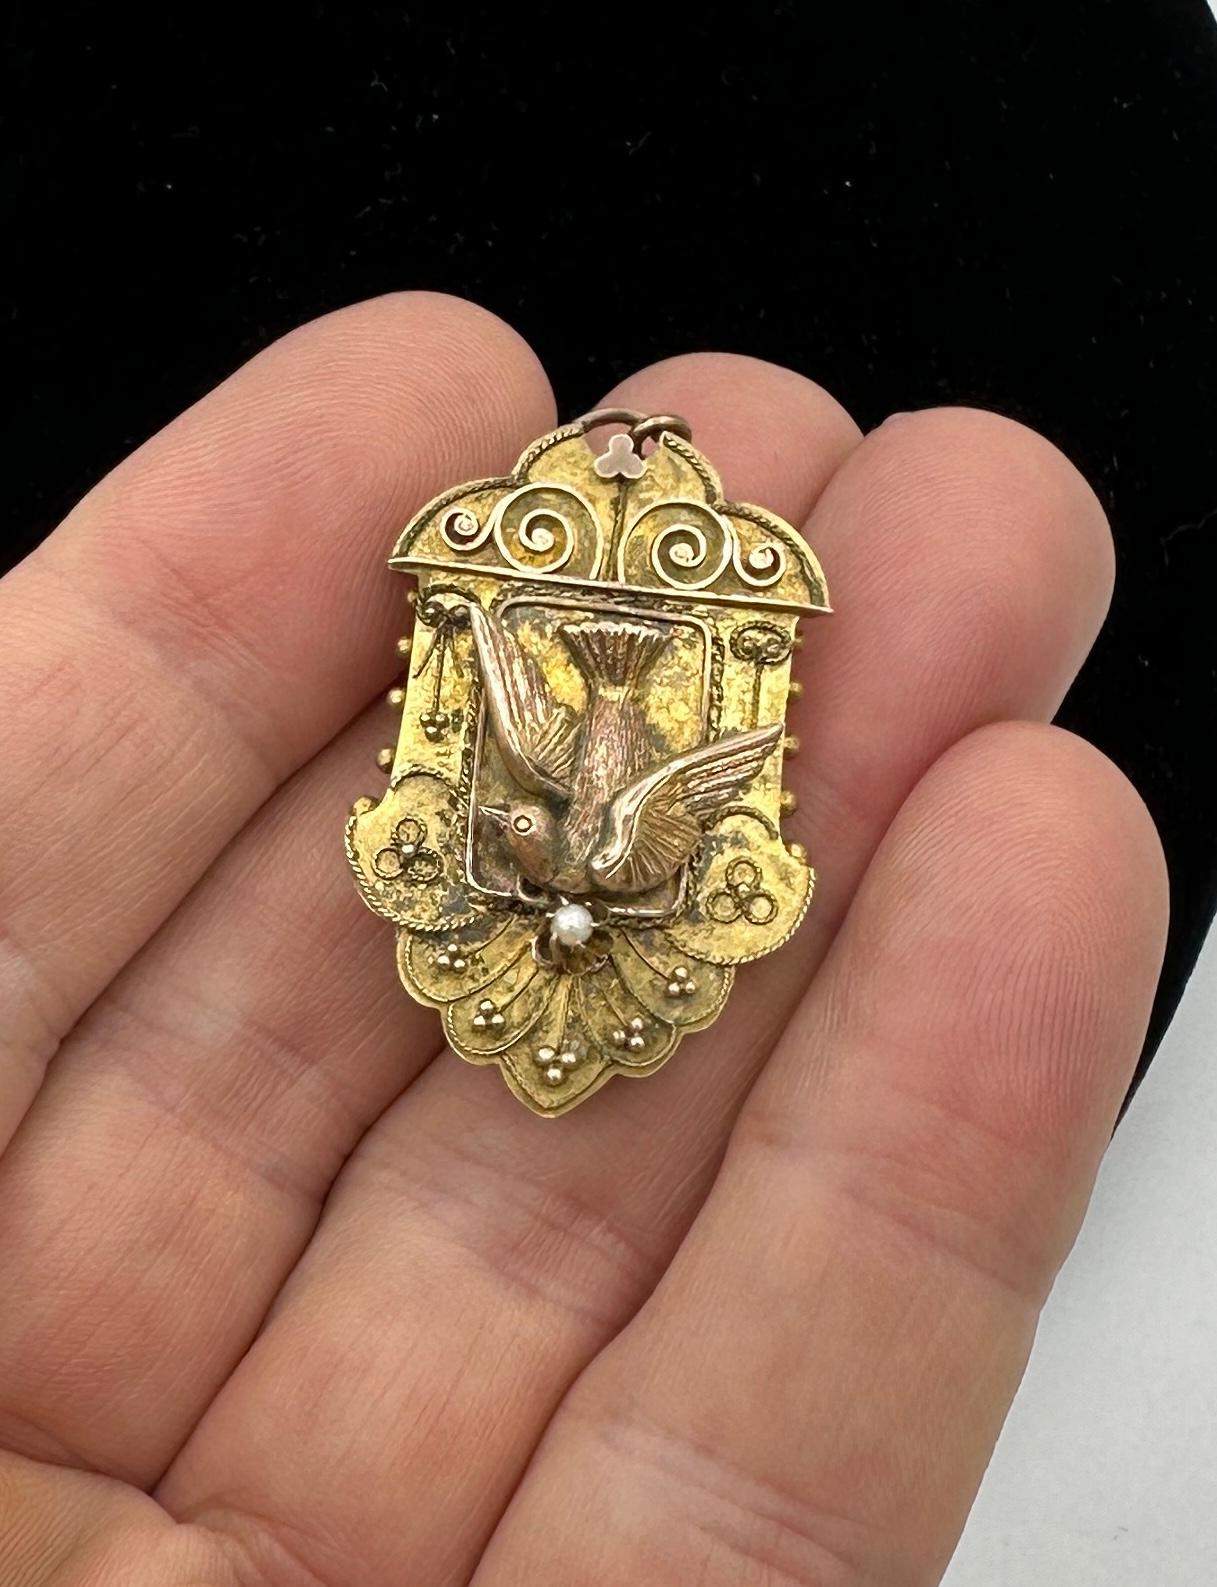 This is a gorgeous and rare antique Victorian bird dove locket pendant brooch in 10 Karat Gold adorned with a Pearl drop in an extraordinary Etruscan Revival three-dimensional design with the flying bird.  The locket is one of the most beautiful